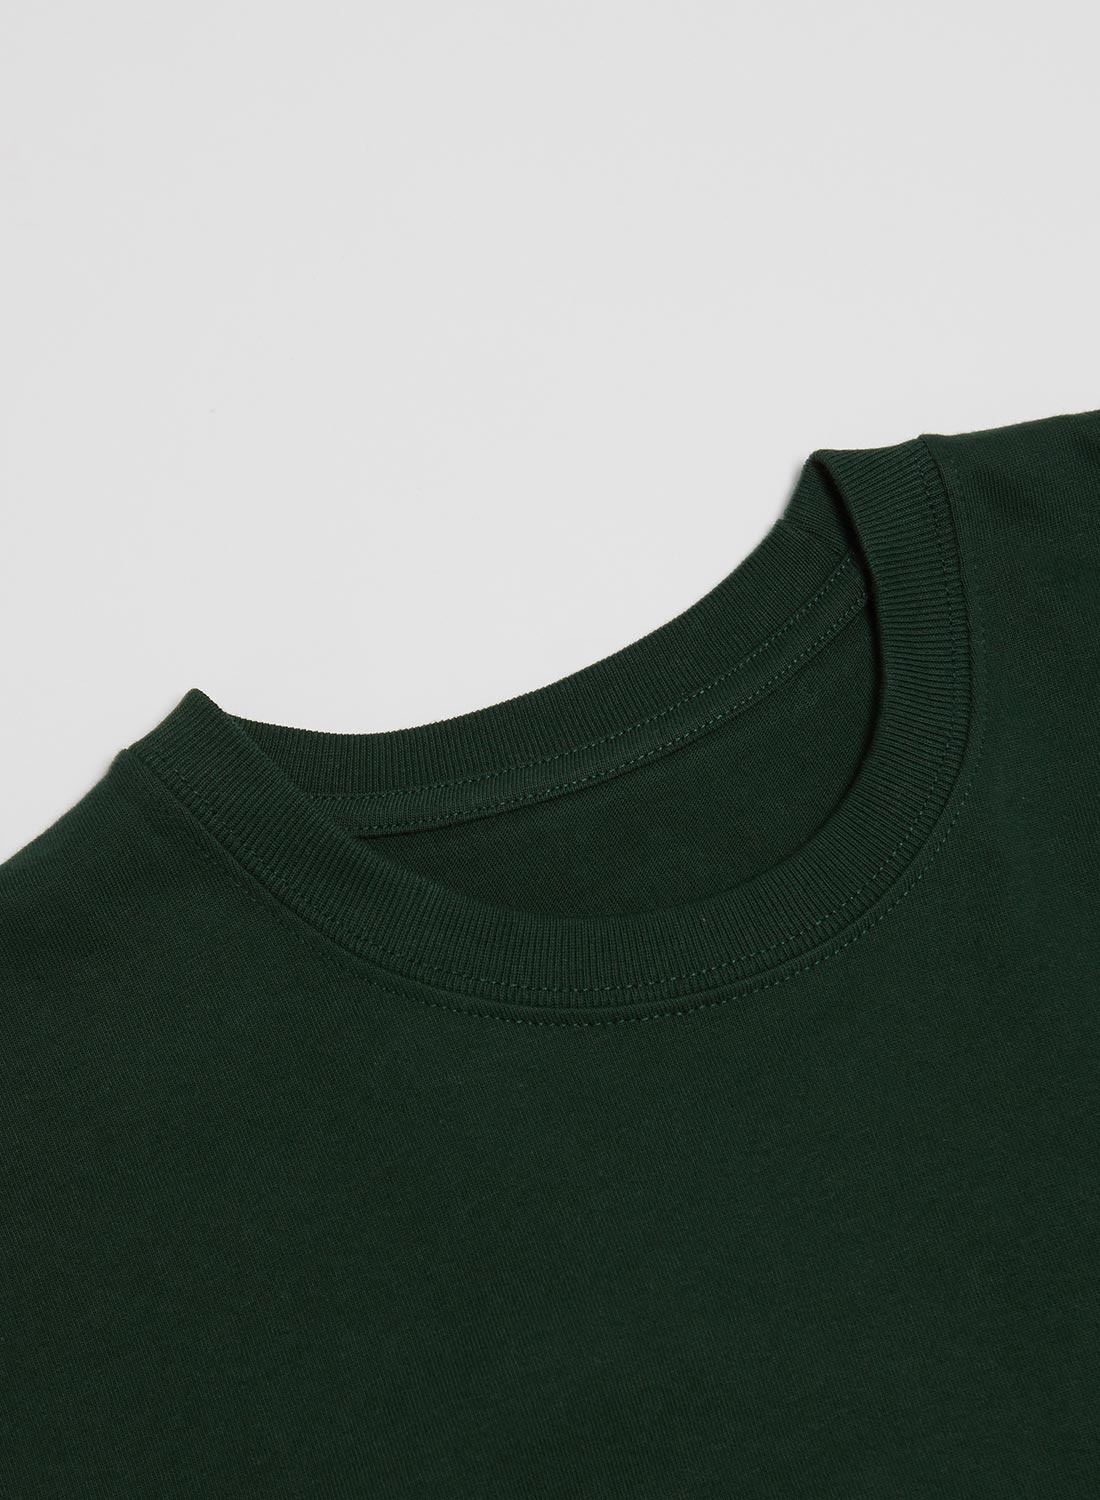 Heavy Duty Athletic T-Shirt in Forest Green - 4